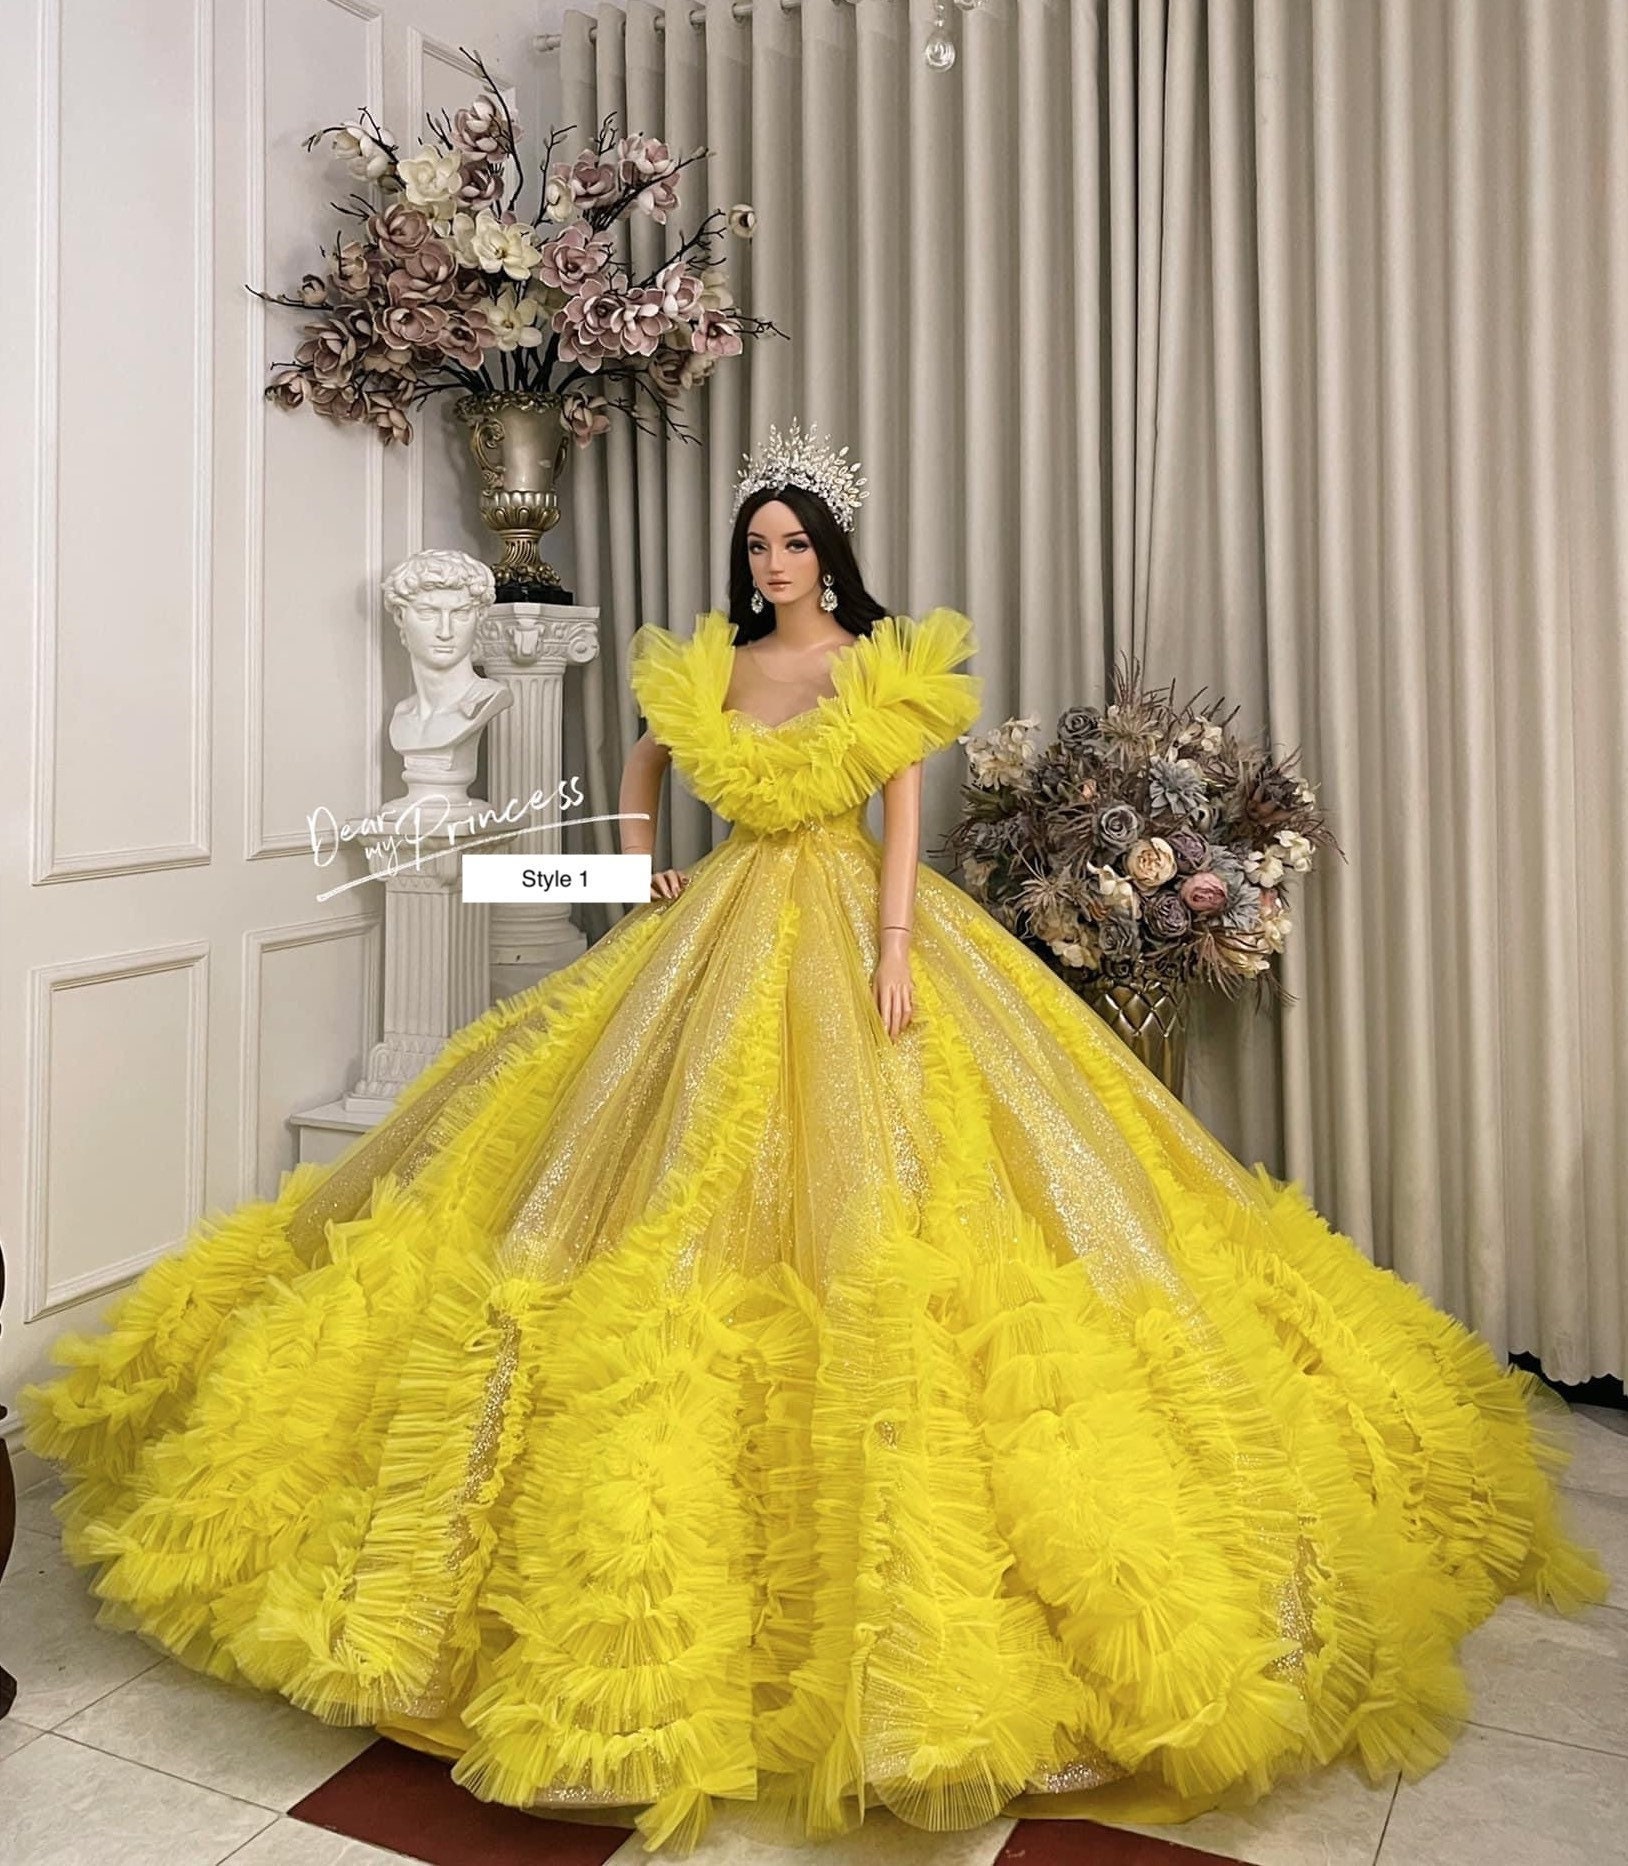 Princess Yellow Prom Dress Beading Top Extra Puffy Girls Party Dresses For  Ruffles Evening Gowns From 178,44 € | DHgate